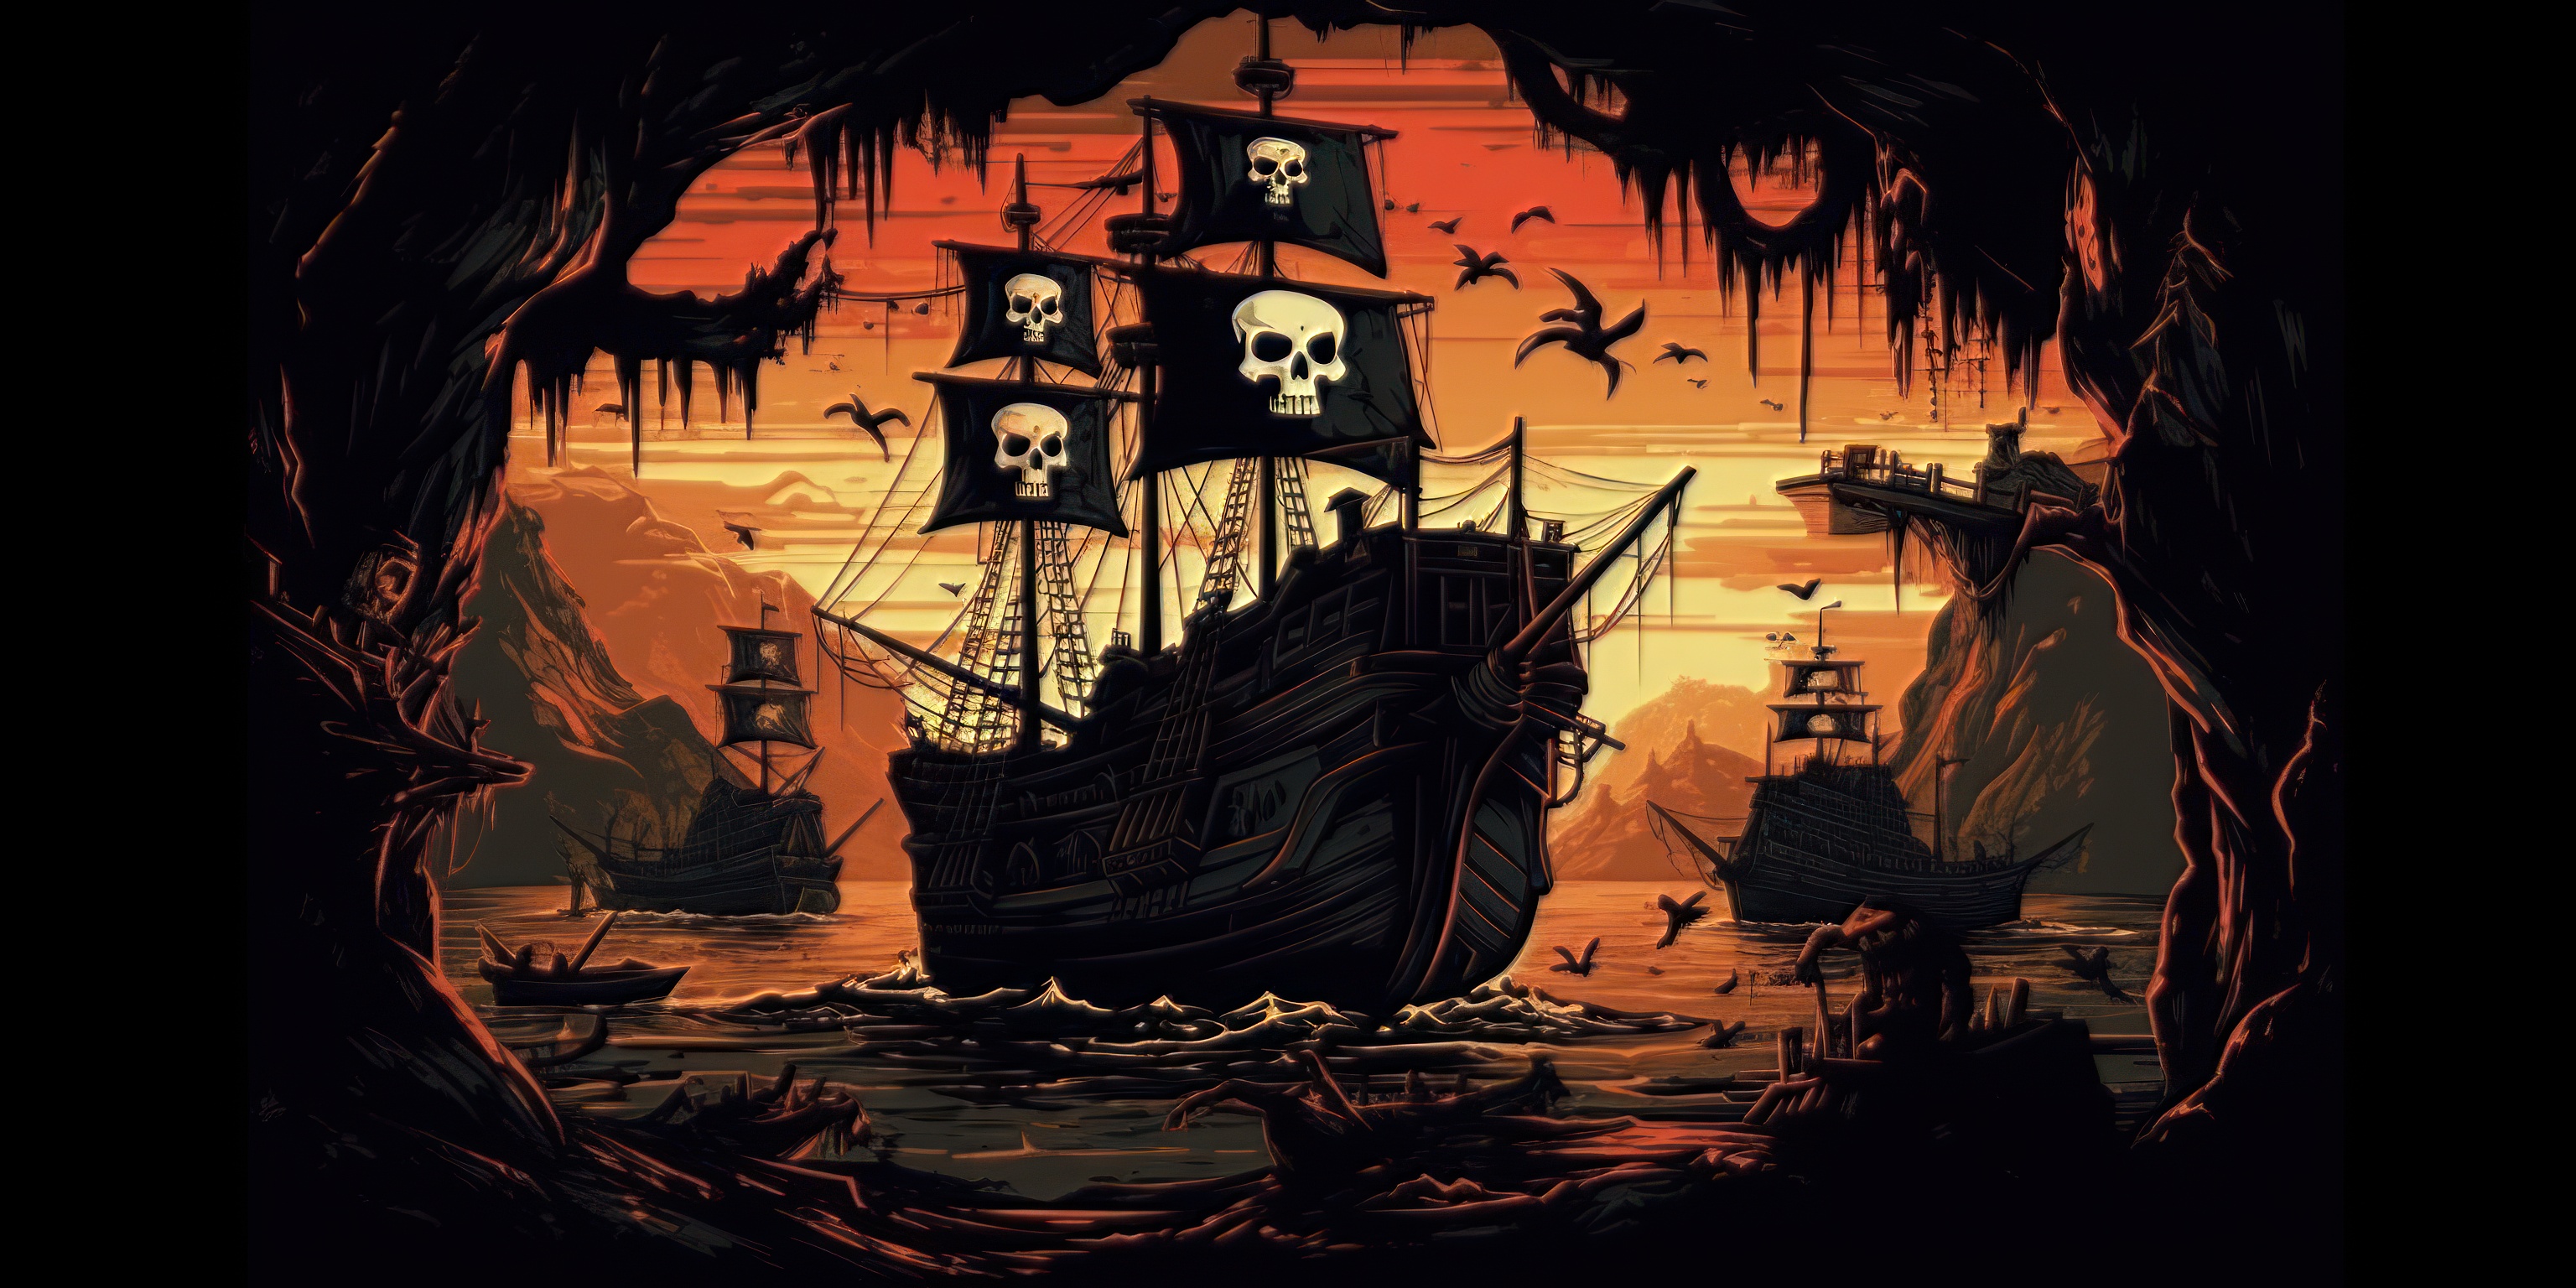 A pirate ship in the bay